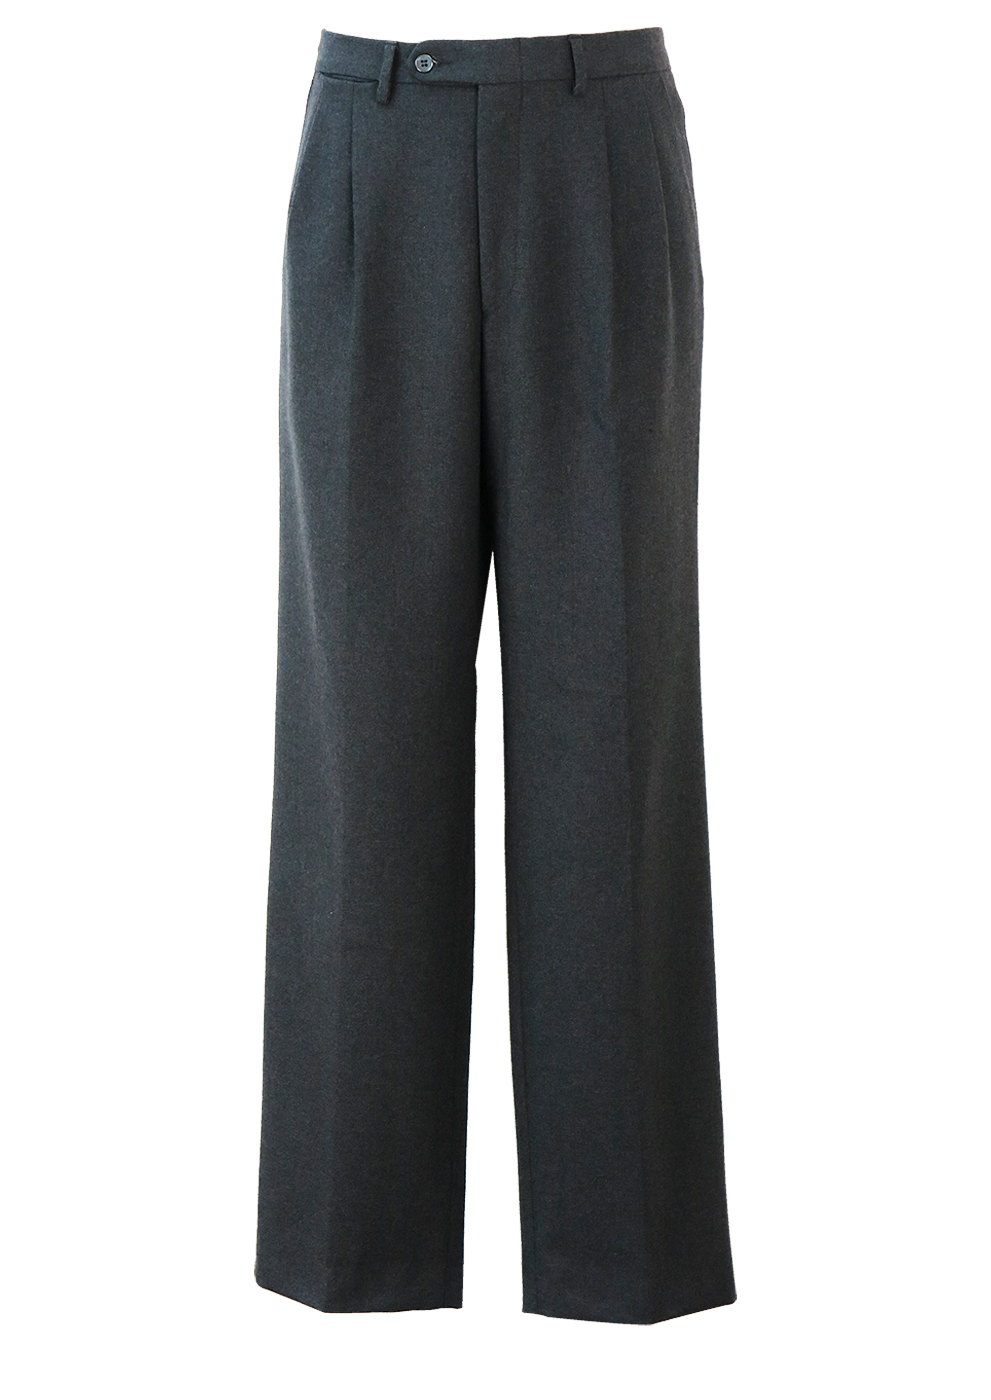 Charcoal Grey, Pleat Front, Tailored Wool Trousers - 33 | Reign Vintage